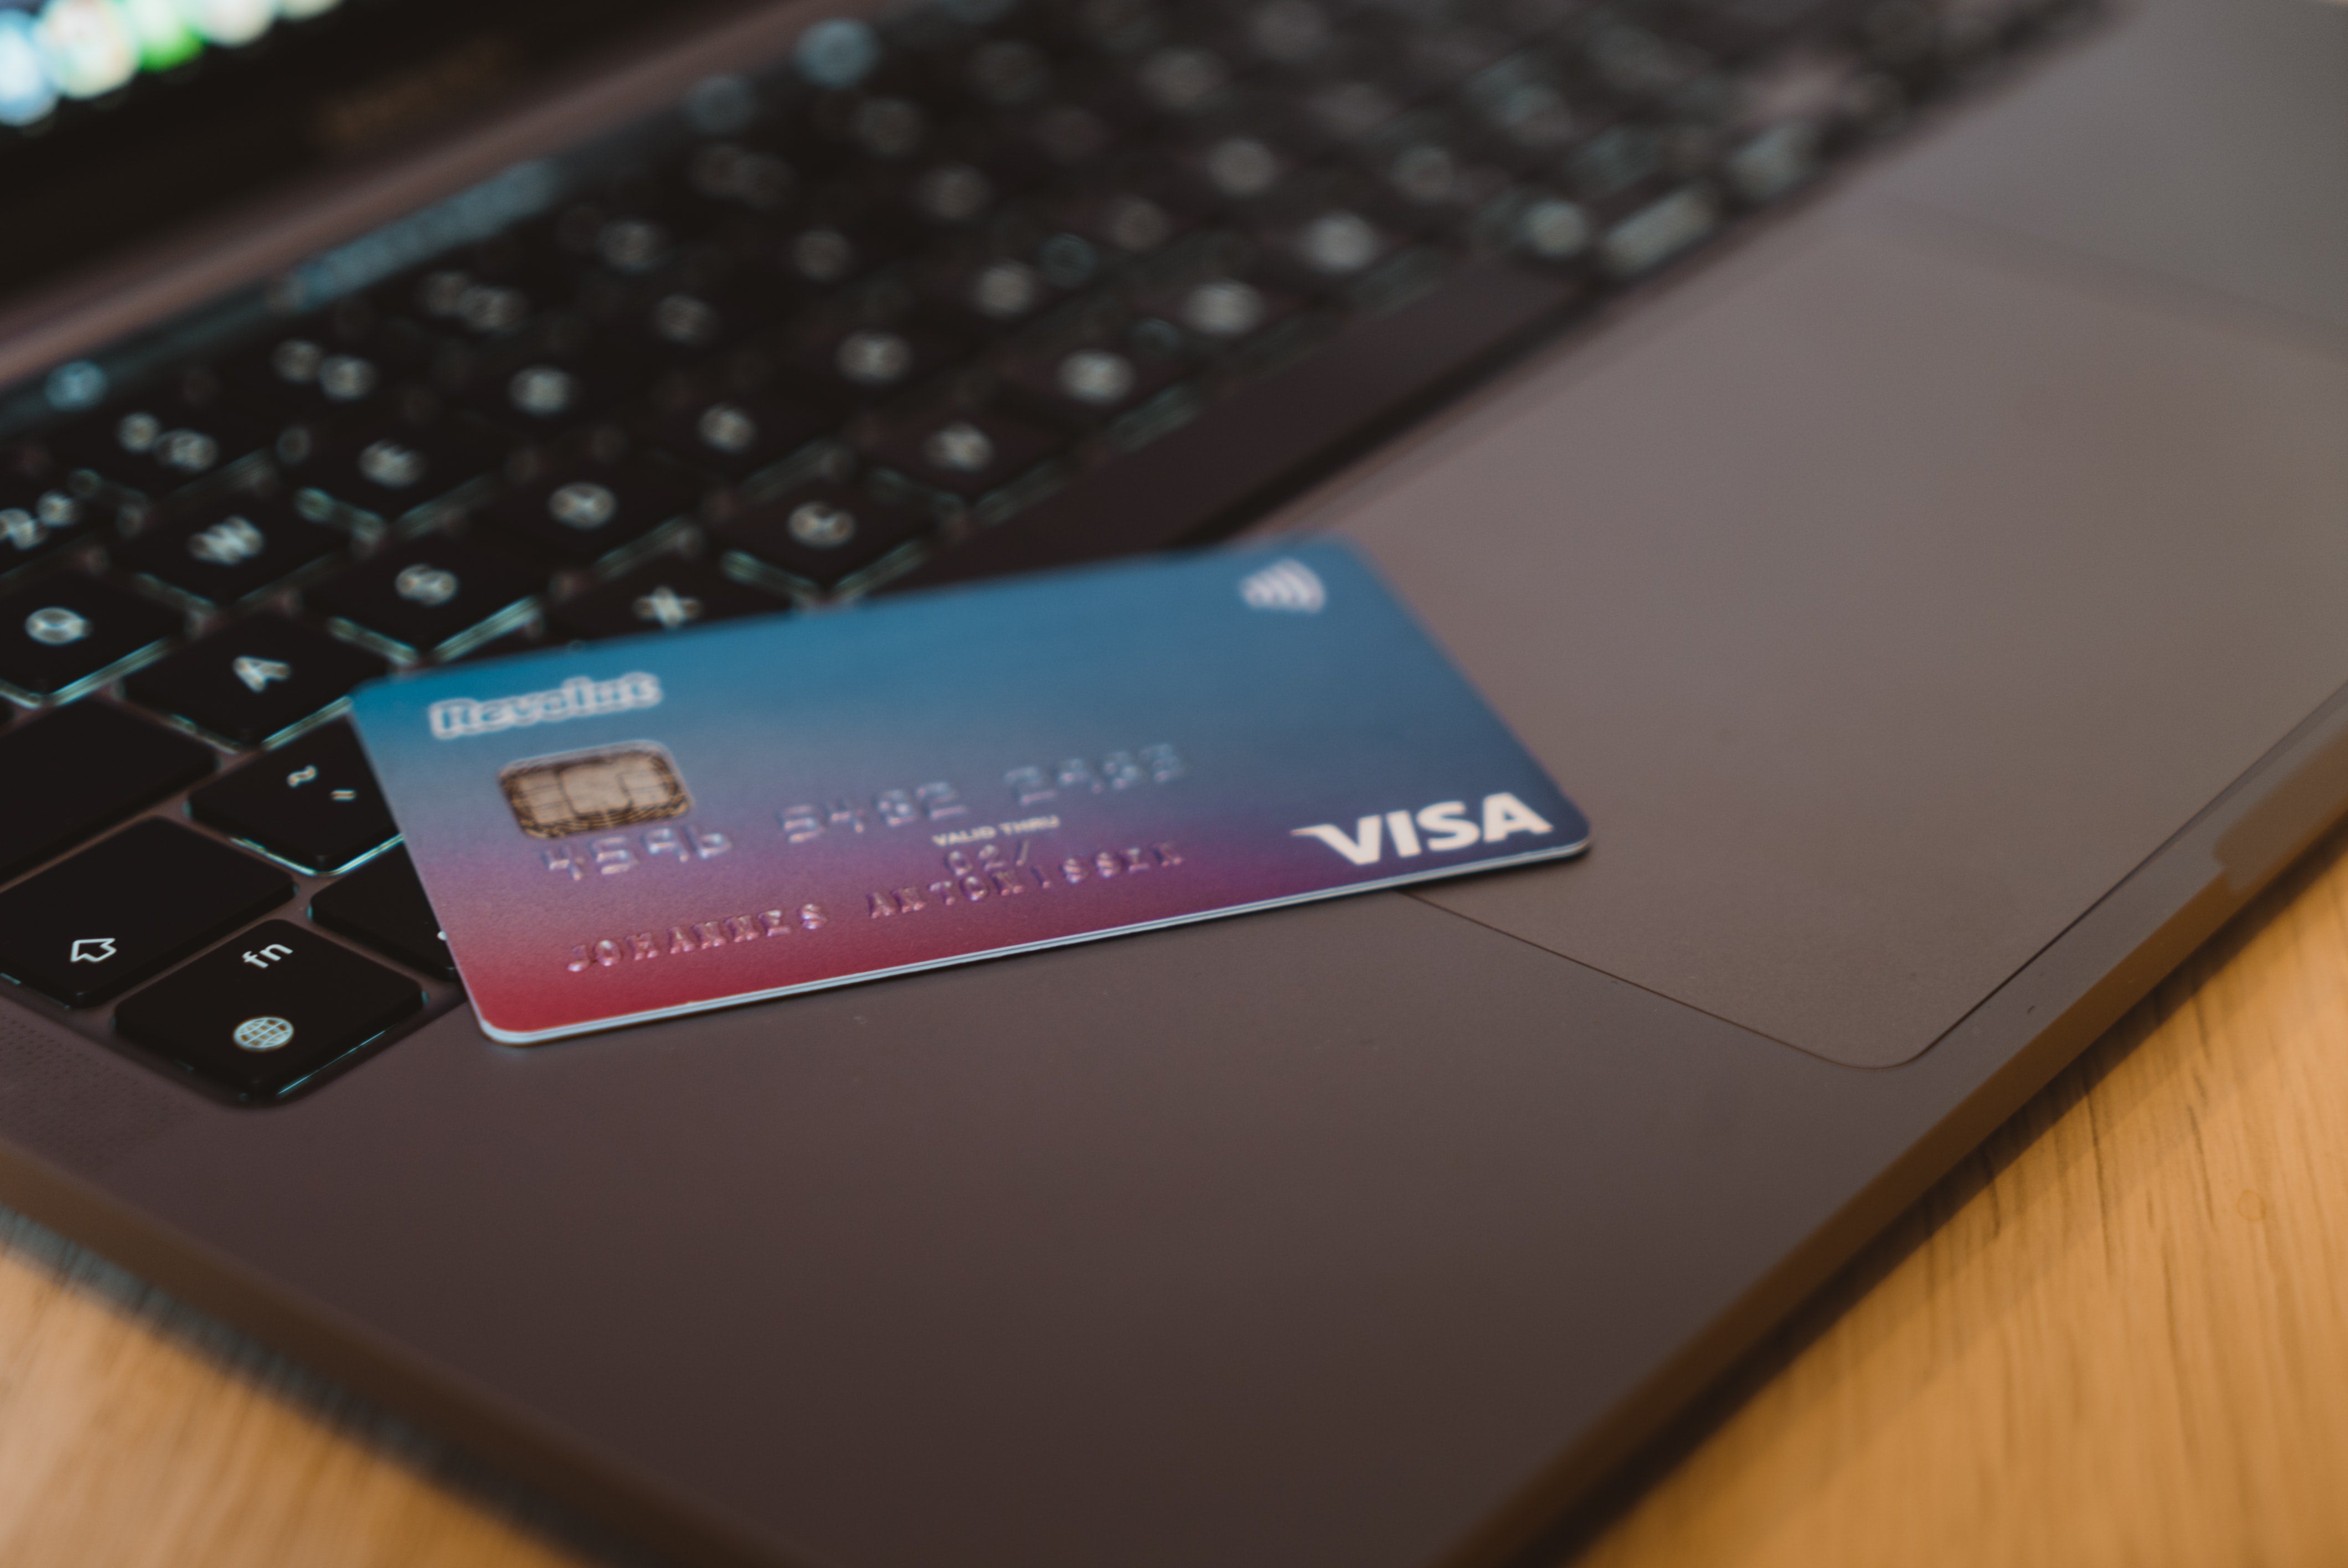 A Visa credit card placed on a laptop